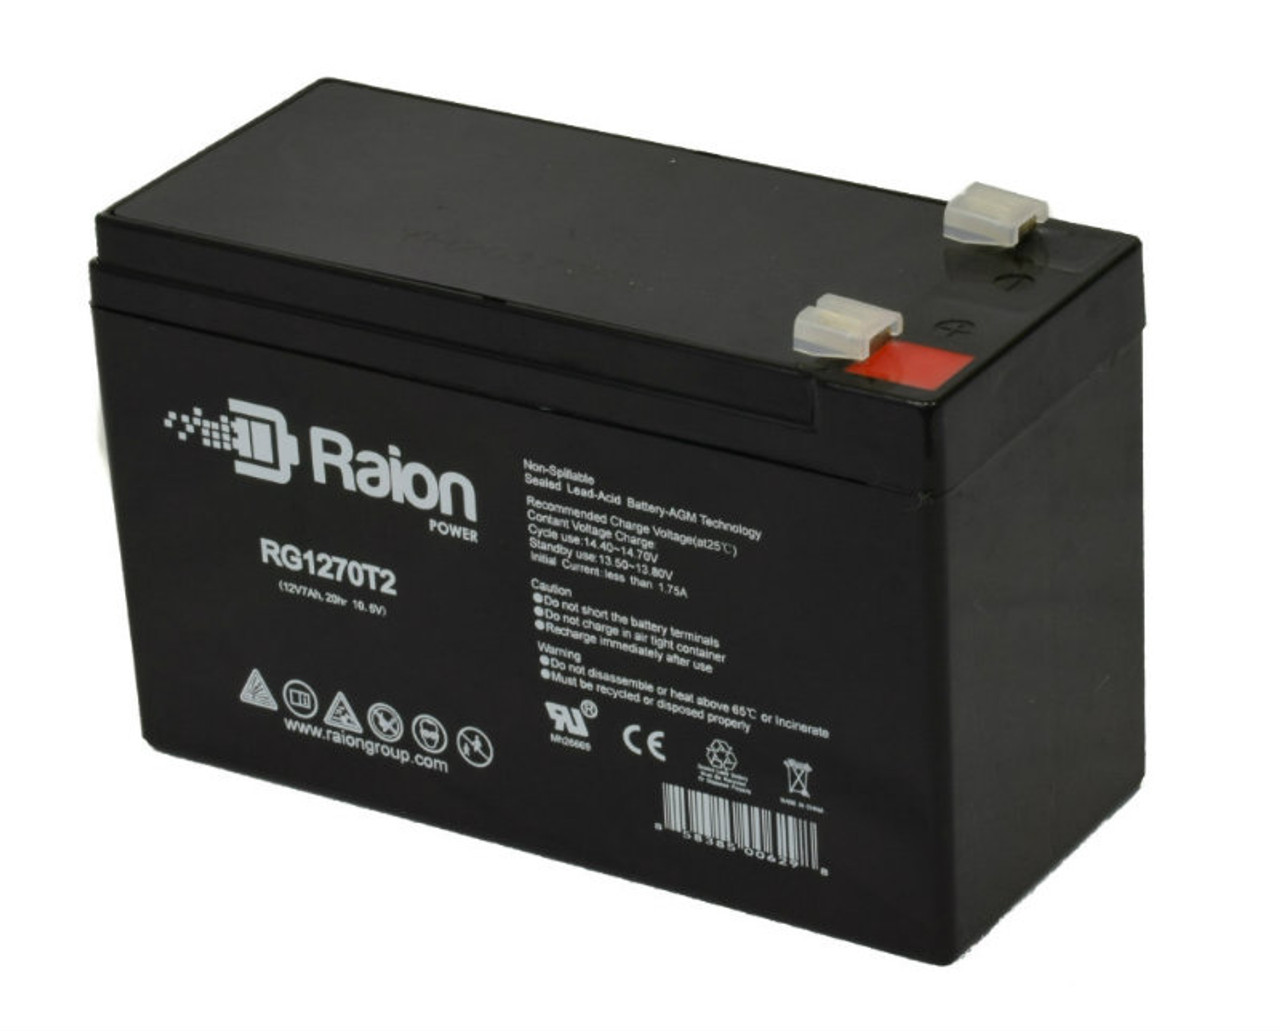 Raion Power Replacement 12V 7Ah Battery for Sunforce Spotlight 77763 12 Million Candle Power - 1 Pack